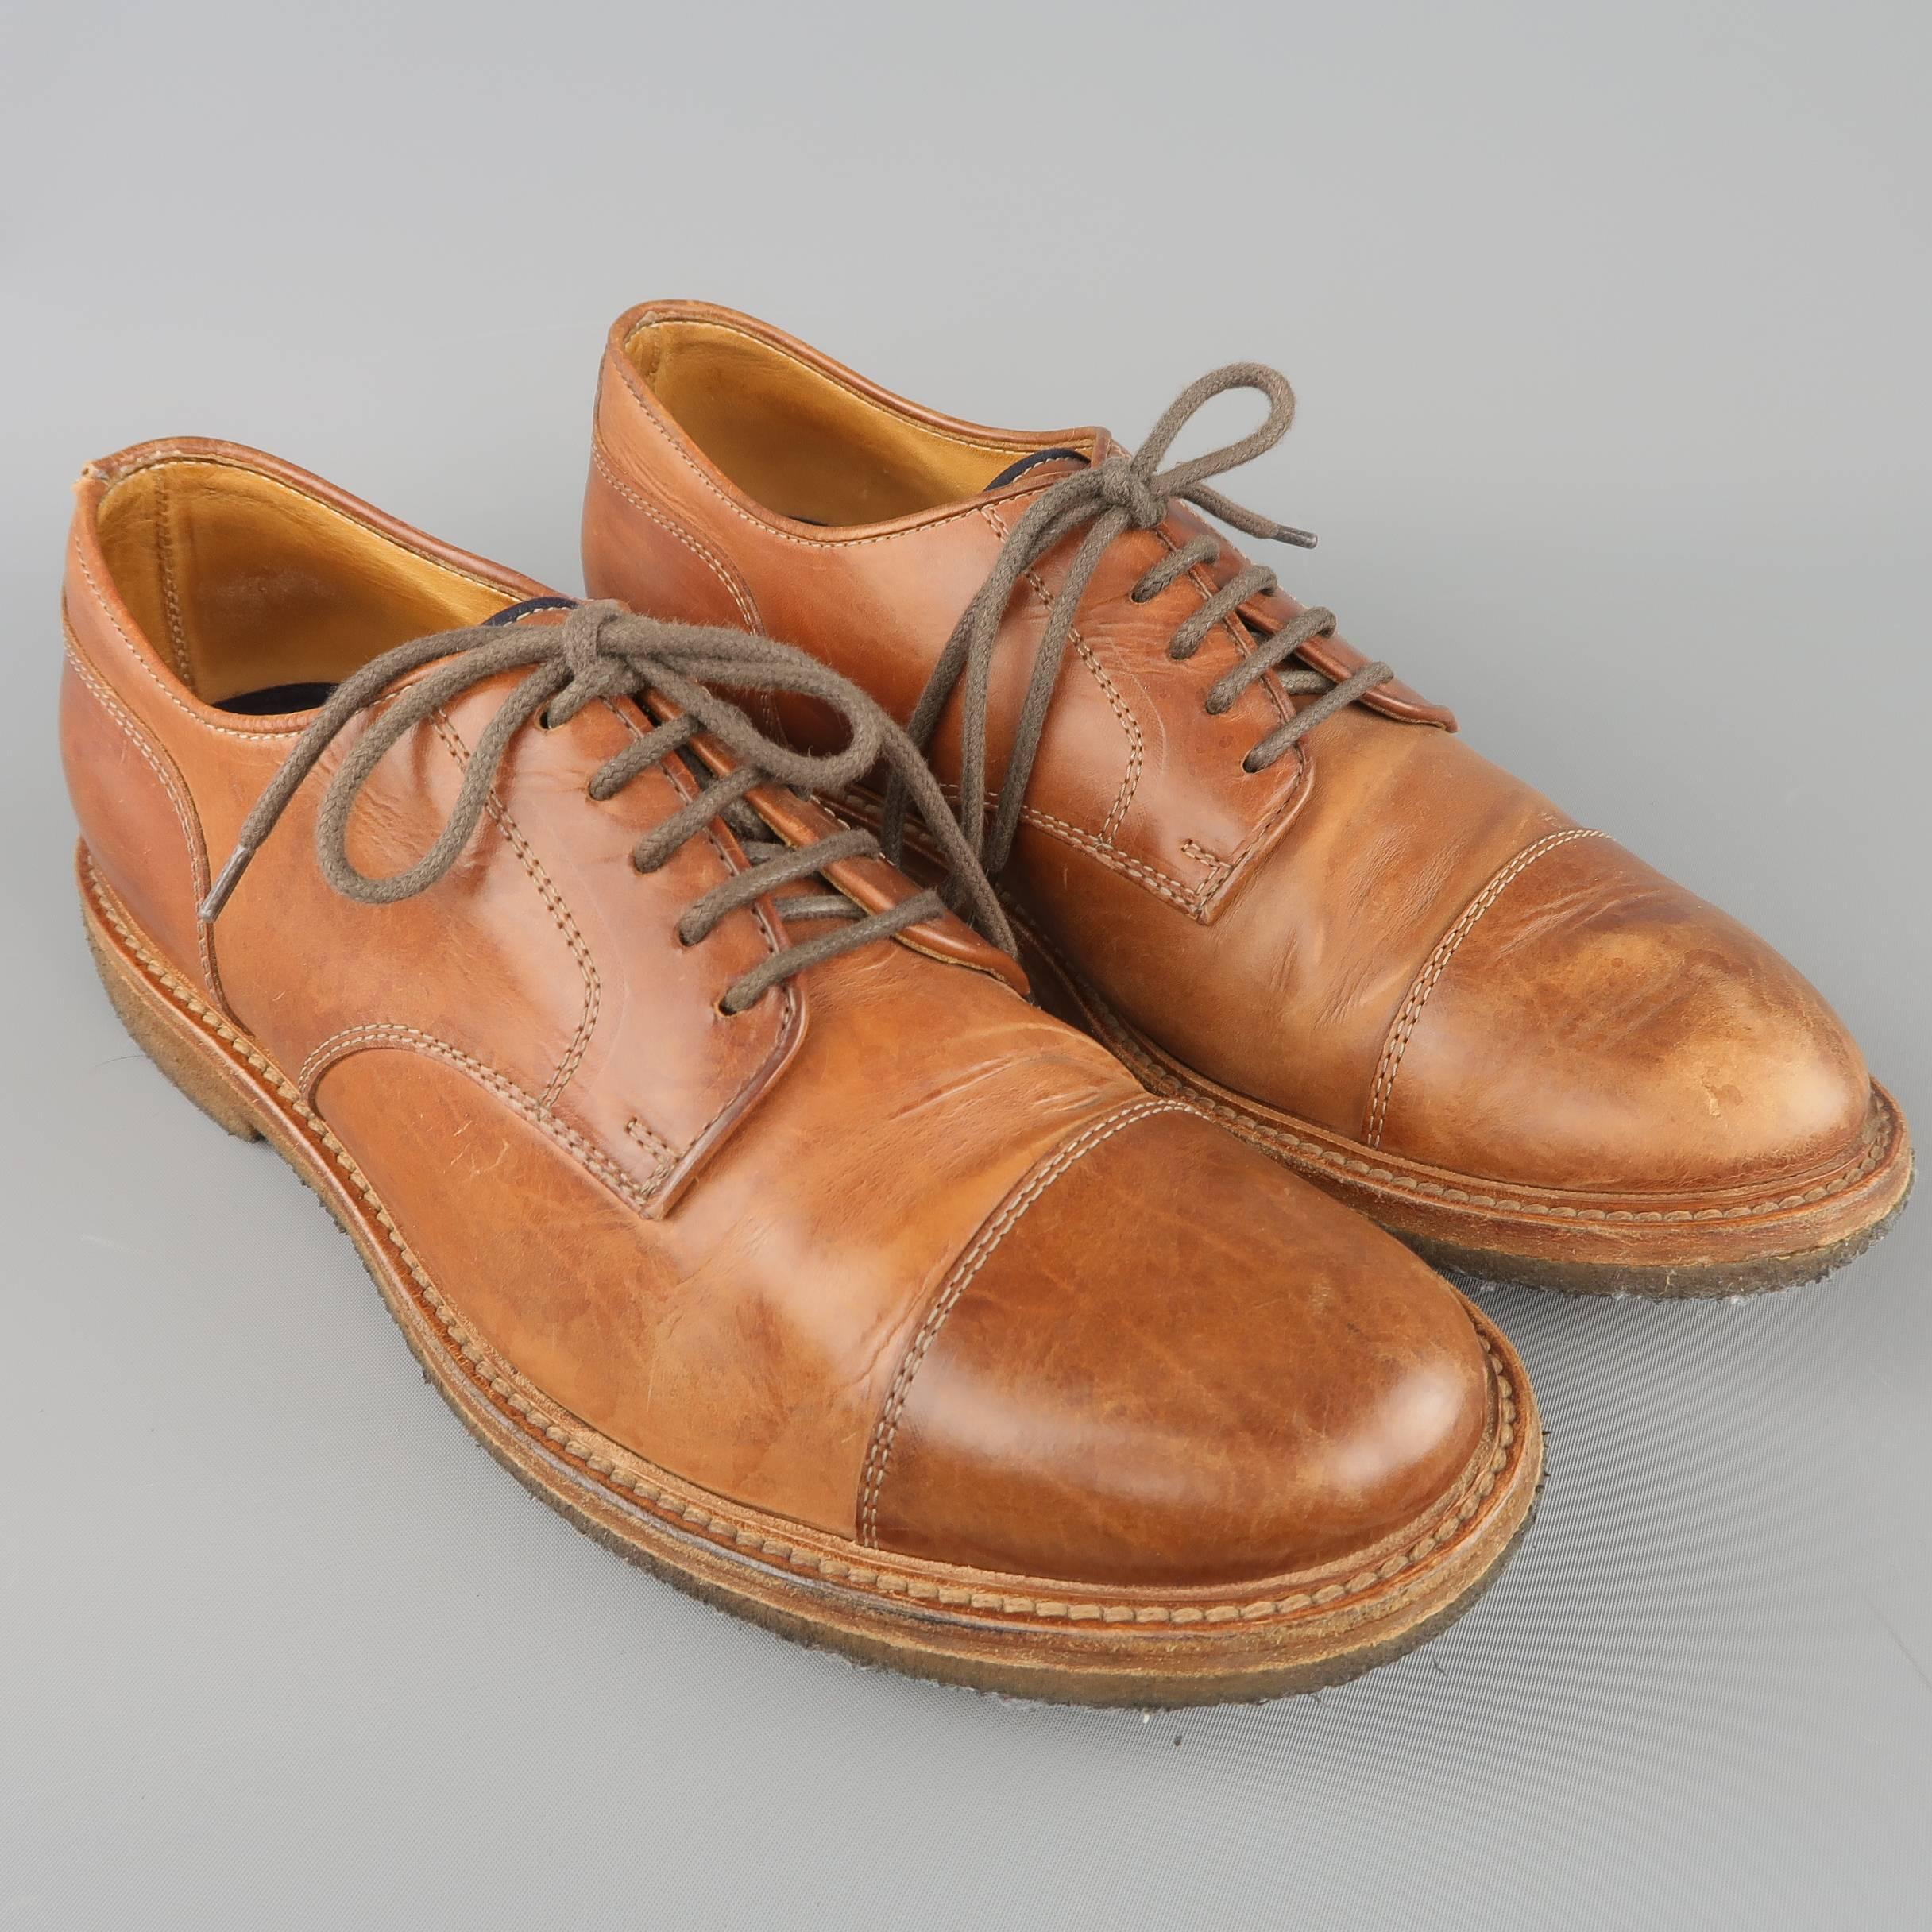 BRUNELLO CUCINELLI dress shoes come in tan leather with a cap toe and crepe sole. Wear throughout. As-is. Made in Italy.
 
Fair Pre-Owned Condition.
Marked: IT 42
 
Outsole: 11.75 X 4.25 in.